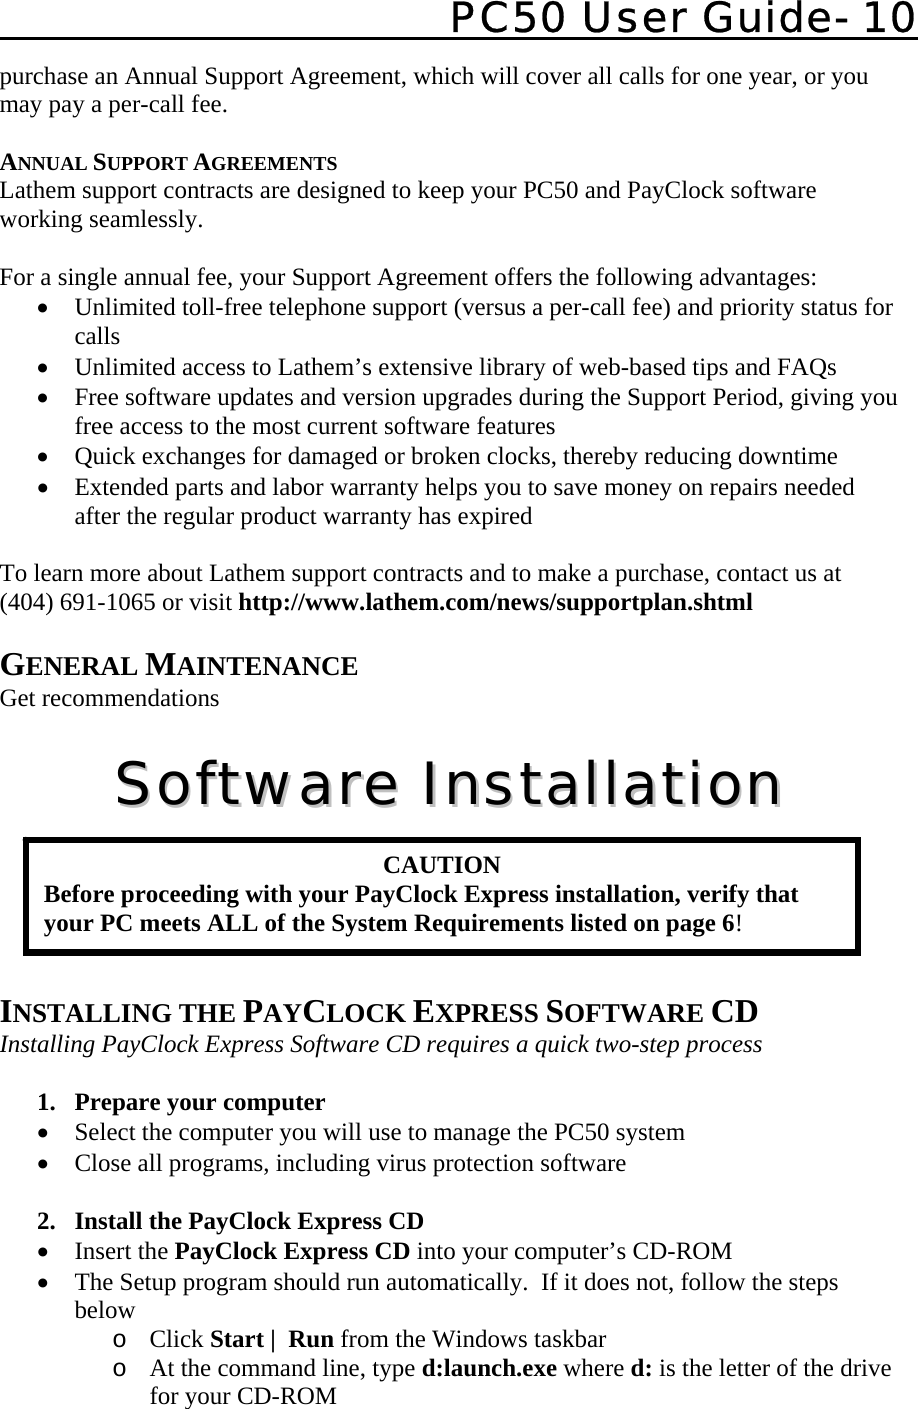   PC50 User Guide- 10   purchase an Annual Support Agreement, which will cover all calls for one year, or you may pay a per-call fee.  ANNUAL SUPPORT AGREEMENTS Lathem support contracts are designed to keep your PC50 and PayClock software working seamlessly.   For a single annual fee, your Support Agreement offers the following advantages: • Unlimited toll-free telephone support (versus a per-call fee) and priority status for calls • Unlimited access to Lathem’s extensive library of web-based tips and FAQs  • Free software updates and version upgrades during the Support Period, giving you free access to the most current software features • Quick exchanges for damaged or broken clocks, thereby reducing downtime  • Extended parts and labor warranty helps you to save money on repairs needed after the regular product warranty has expired  To learn more about Lathem support contracts and to make a purchase, contact us at (404) 691-1065 or visit http://www.lathem.com/news/supportplan.shtml  GENERAL MAINTENANCE Get recommendations  SSooffttwwaarree  IInnssttaallllaattiioonn       INSTALLING THE PAYCLOCK EXPRESS SOFTWARE CD Installing PayClock Express Software CD requires a quick two-step process   1.  Prepare your computer • Select the computer you will use to manage the PC50 system • Close all programs, including virus protection software  2.  Install the PayClock Express CD • Insert the PayClock Express CD into your computer’s CD-ROM • The Setup program should run automatically.  If it does not, follow the steps below o Click Start |  Run from the Windows taskbar o At the command line, type d:launch.exe where d: is the letter of the drive for your CD-ROM CAUTION Before proceeding with your PayClock Express installation, verify that your PC meets ALL of the System Requirements listed on page 6! 